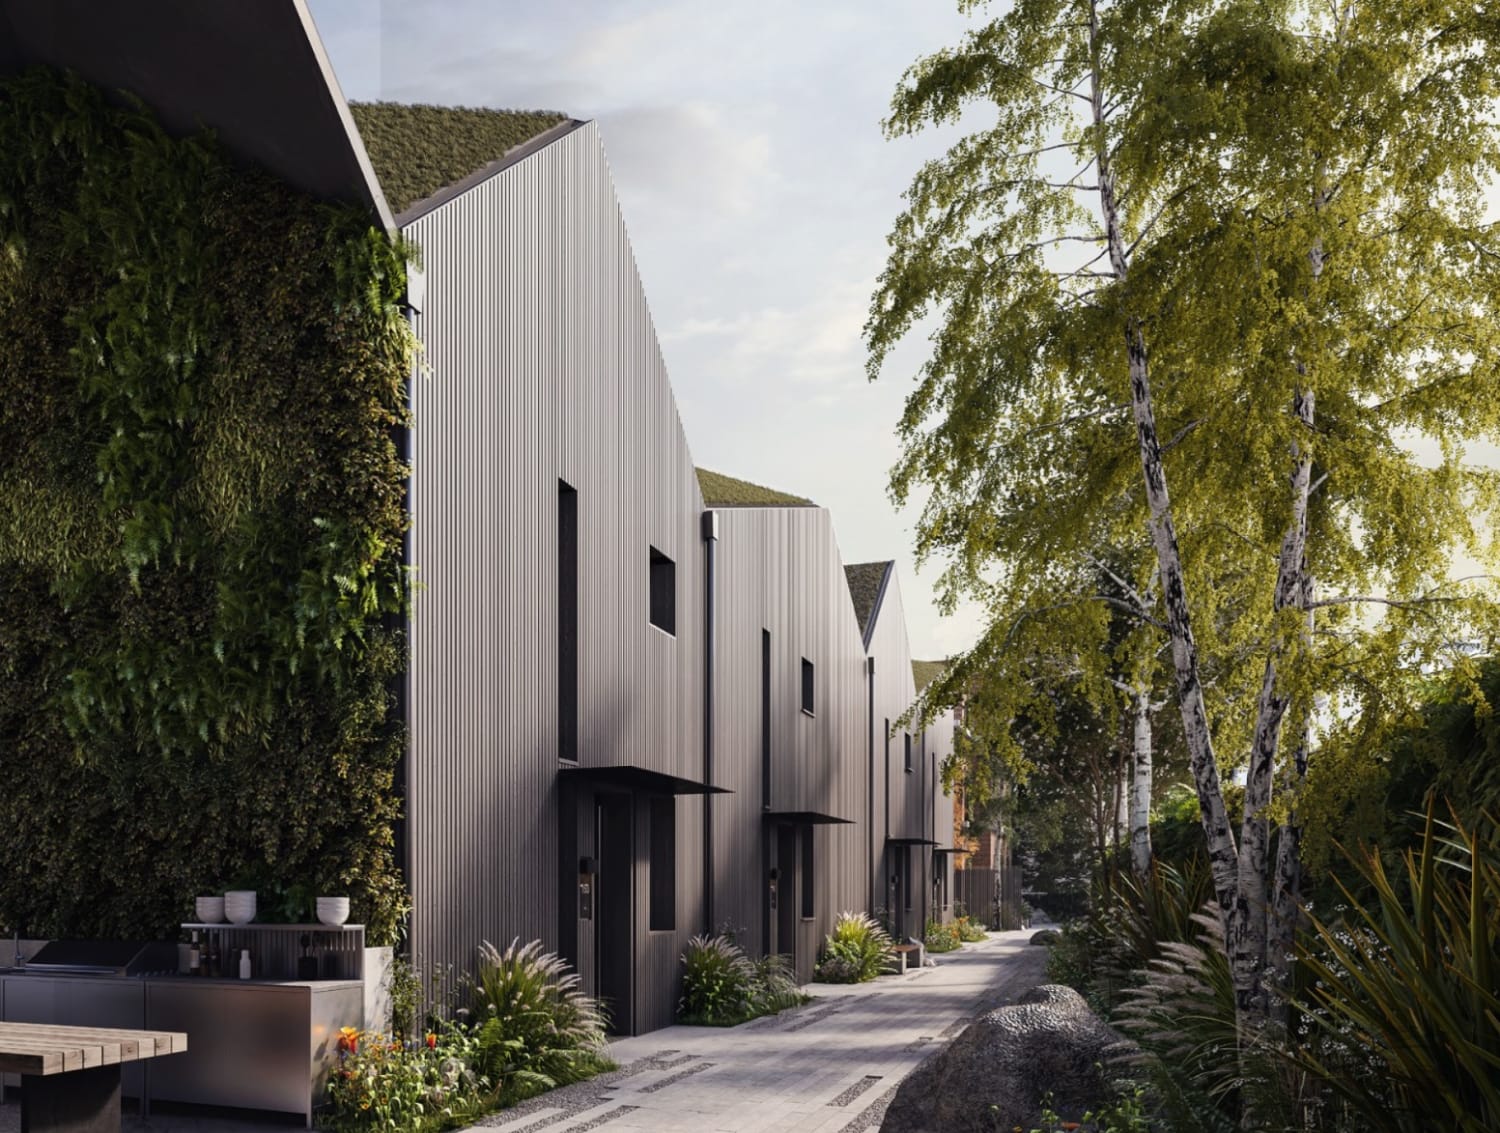 Studio Anyo gets go-ahead for carbon positive, zero waste east London mews